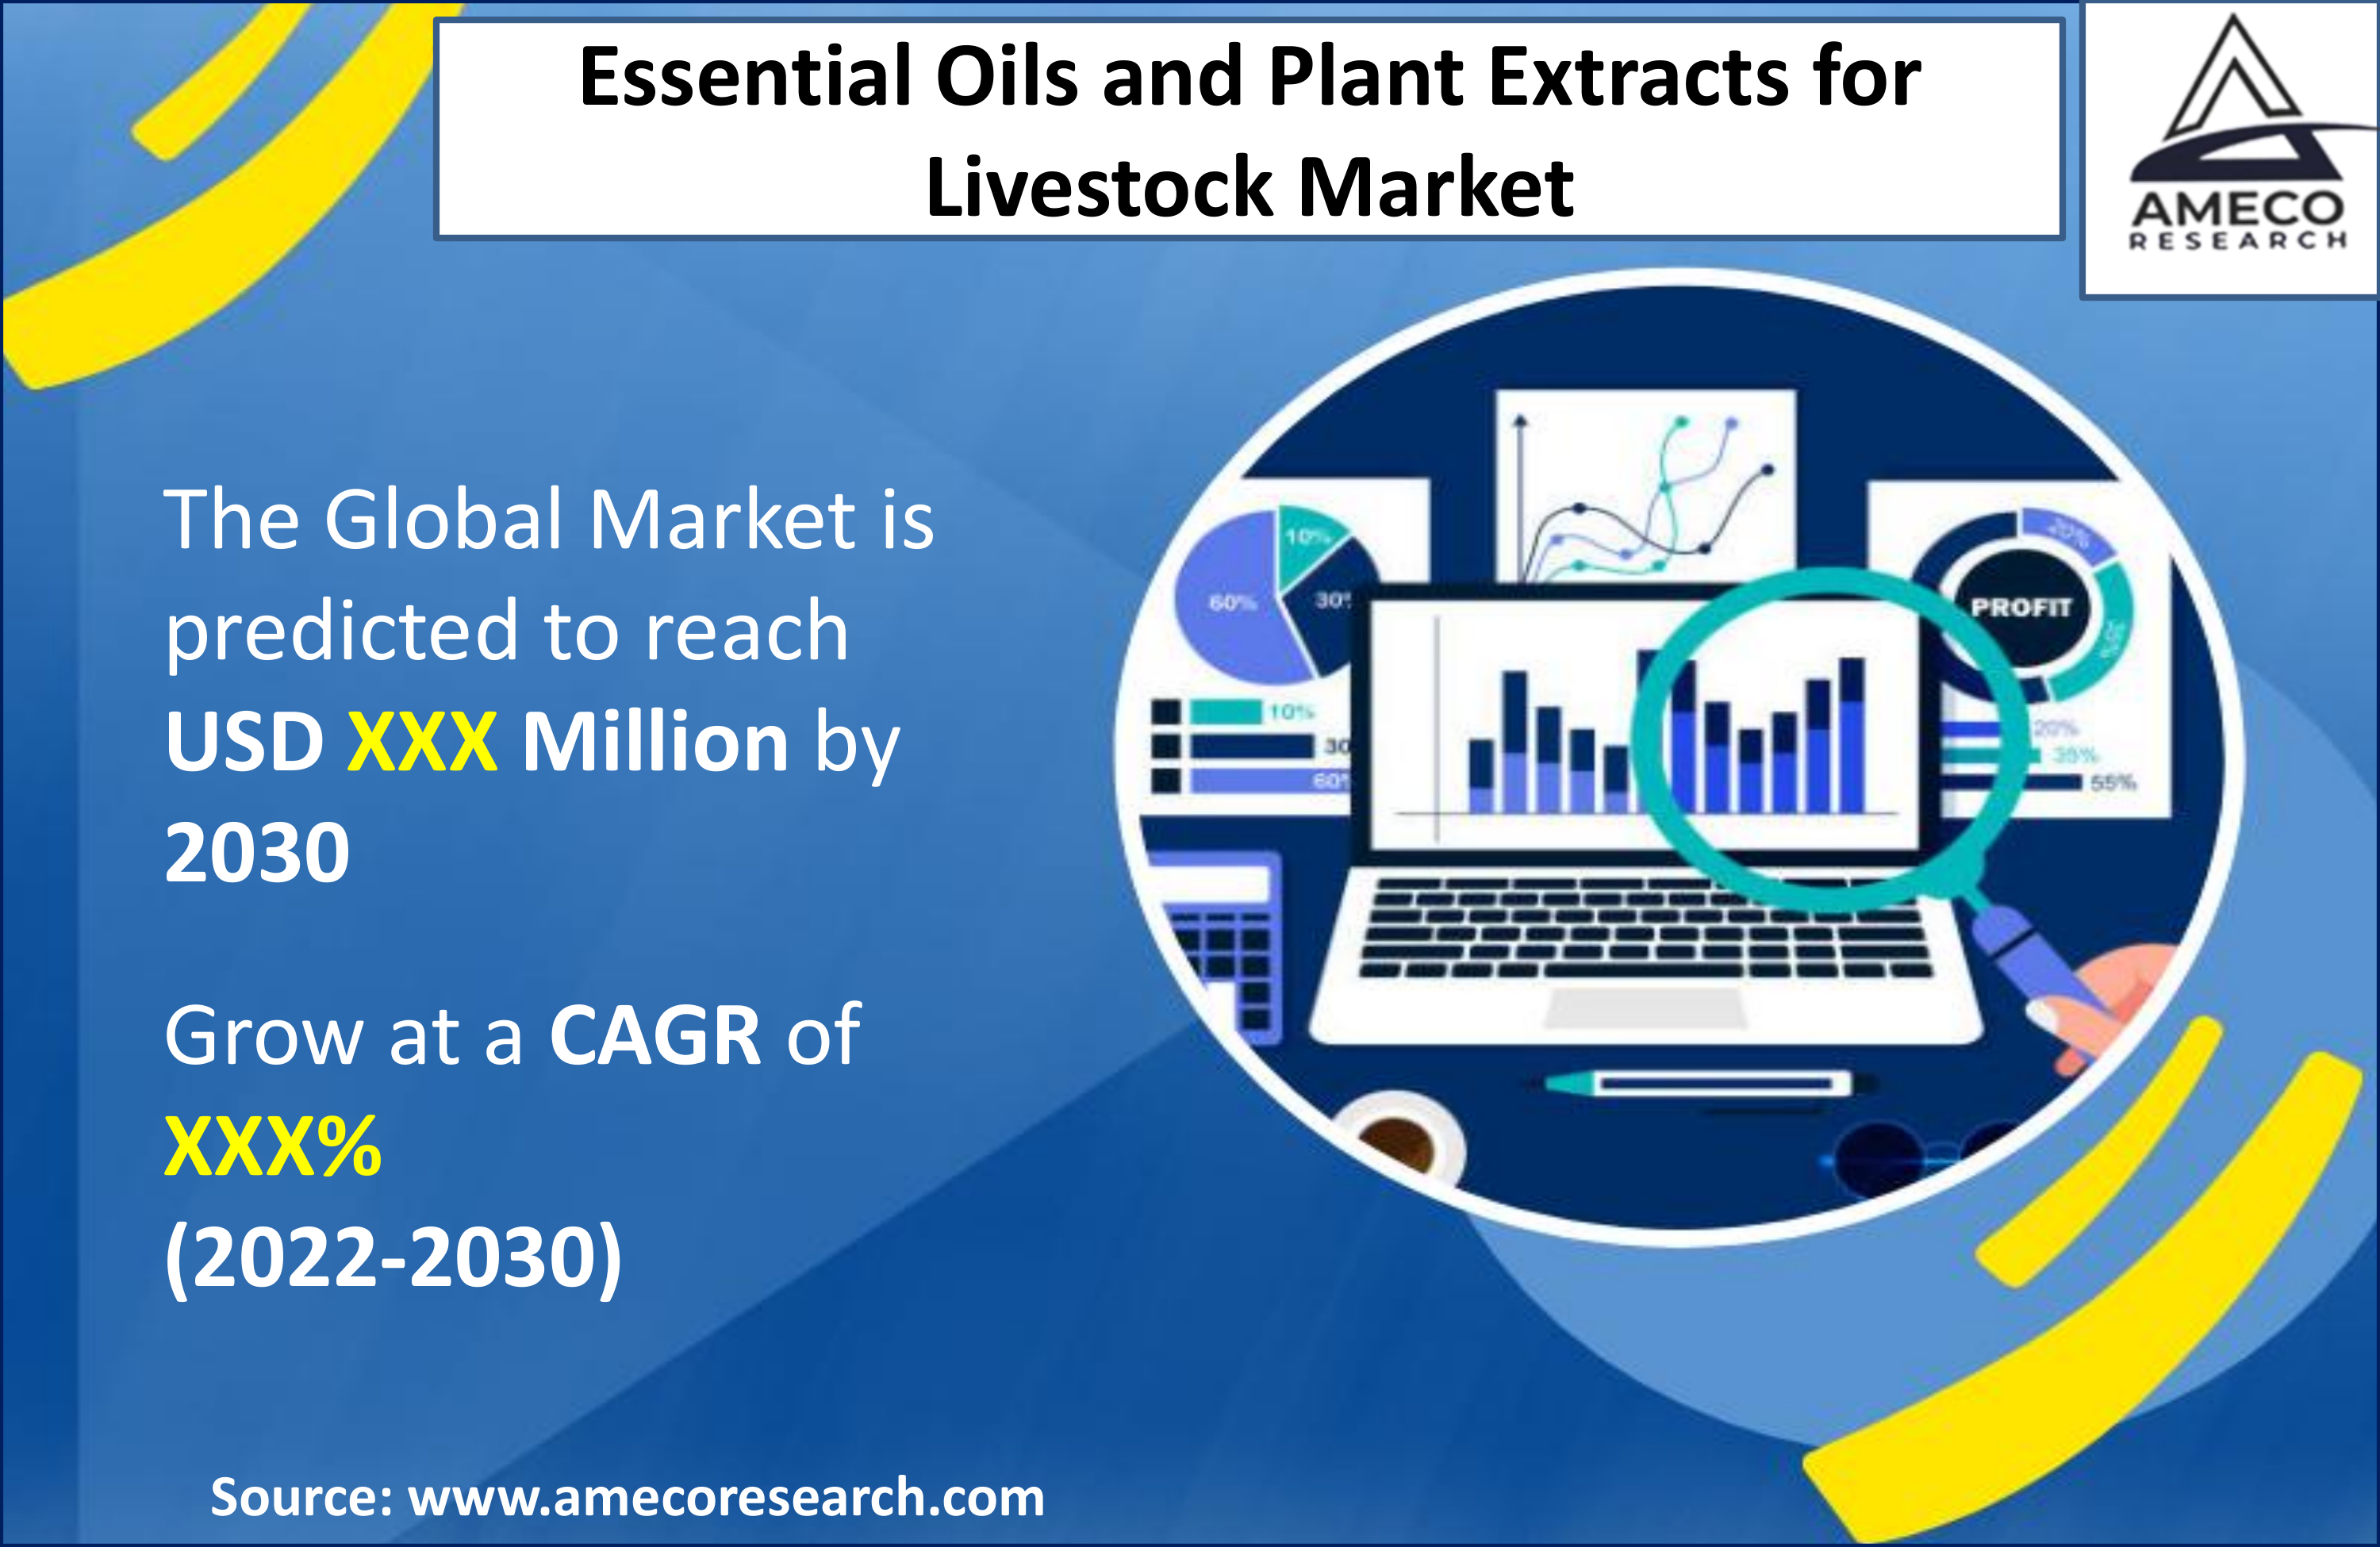 Essential Oils and Plant Extracts for Livestock Market